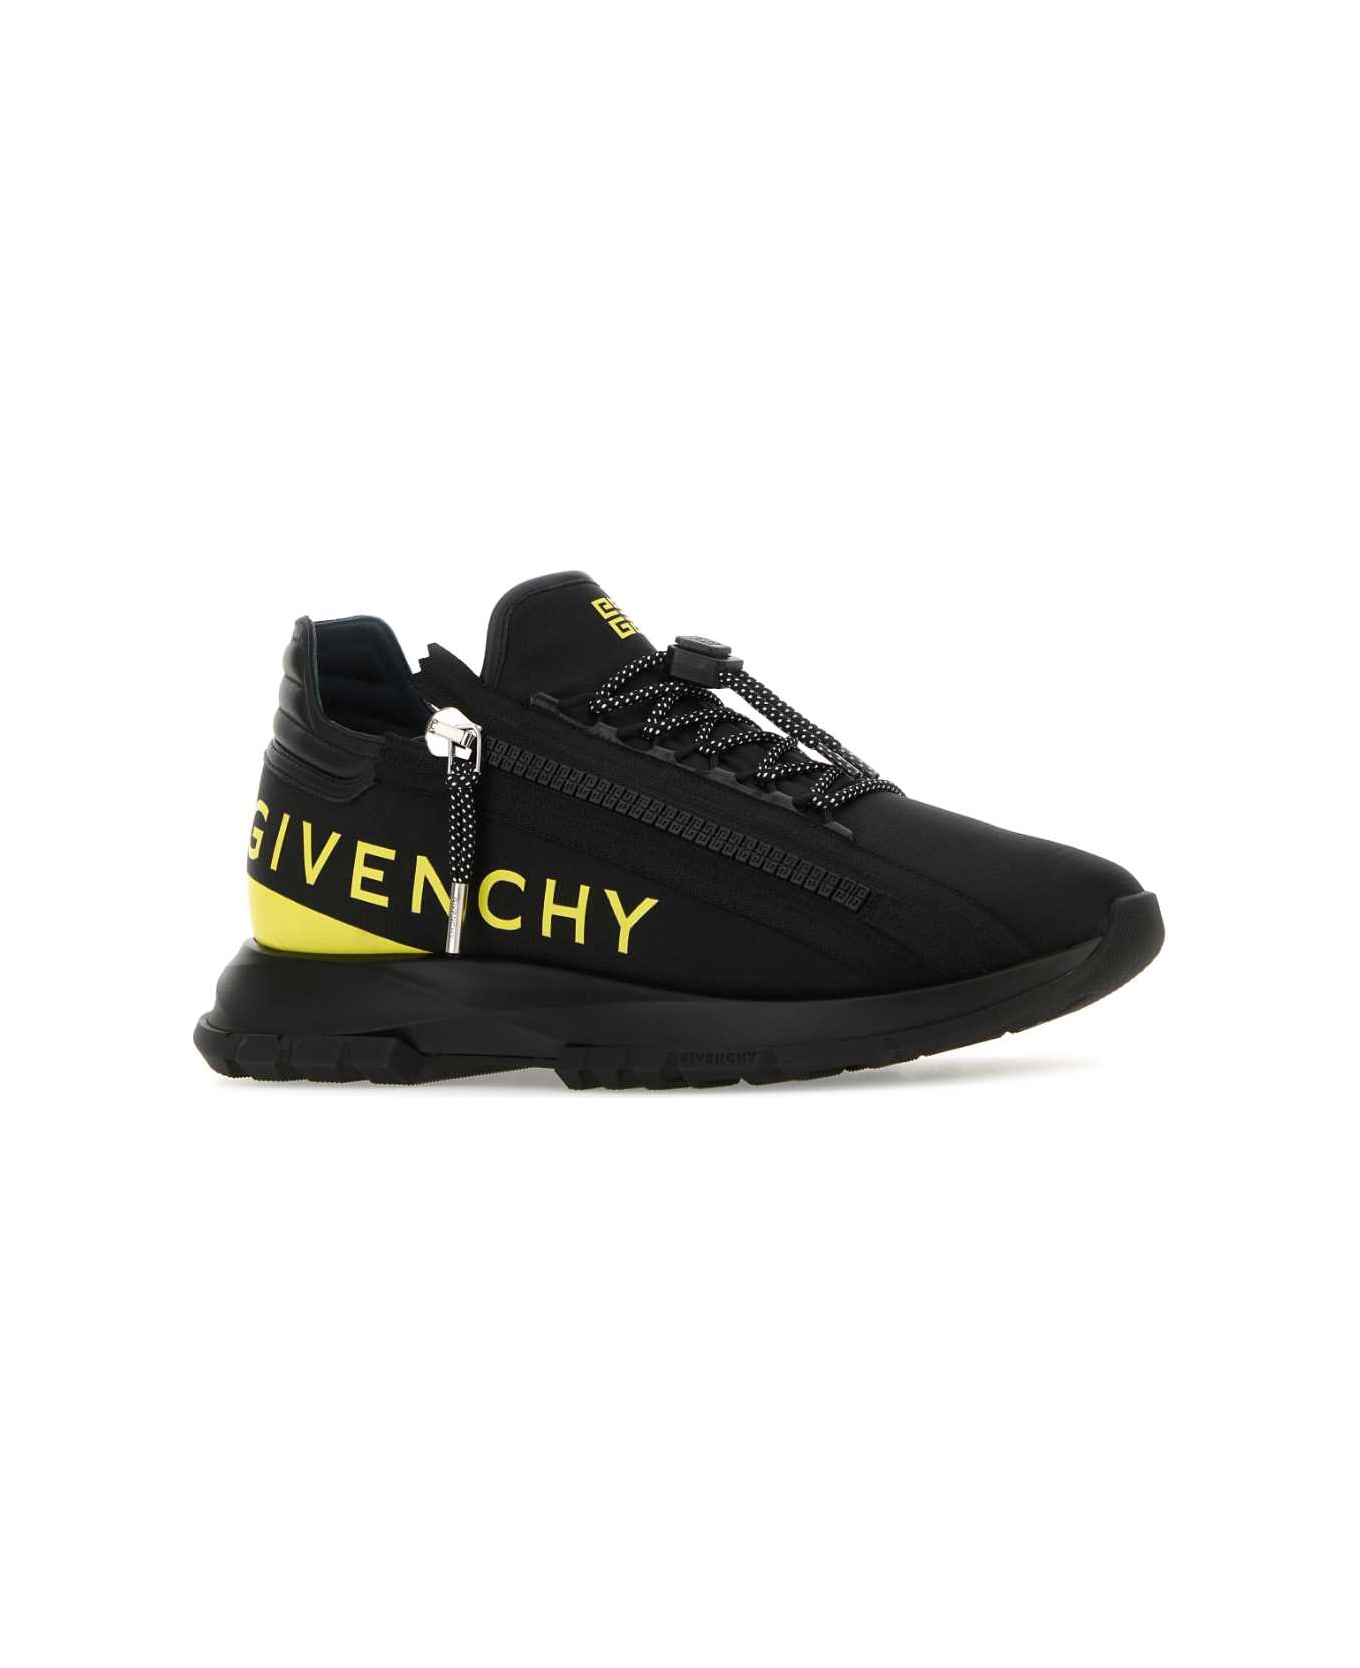 Givenchy Black Fabric Spectre Sneakers - BLACKYELLOW